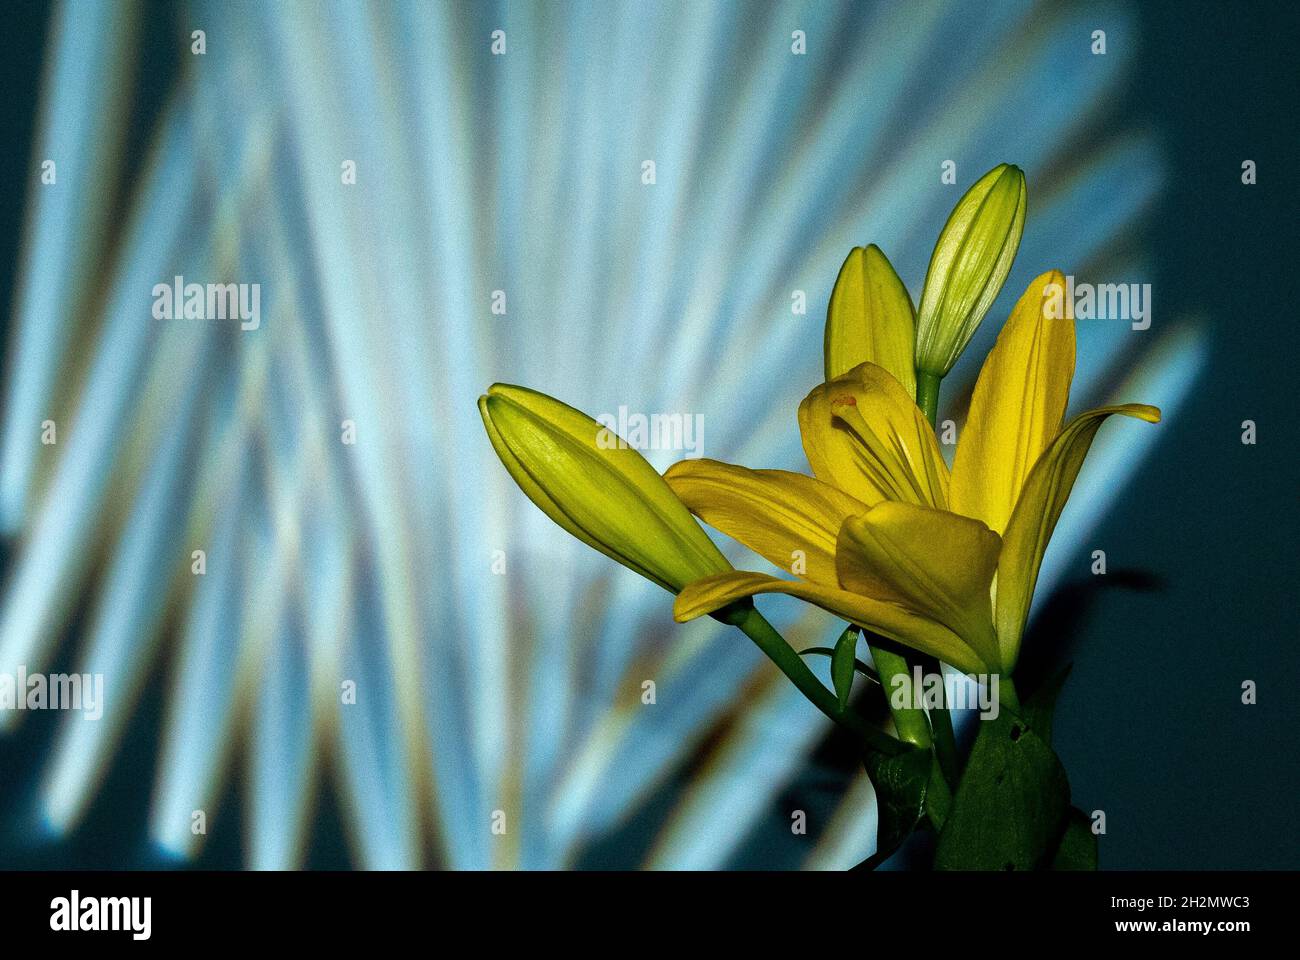 Beautiful yellow blooming lilly flower with buds isolated on dark green background with gobo mask Stock Photo